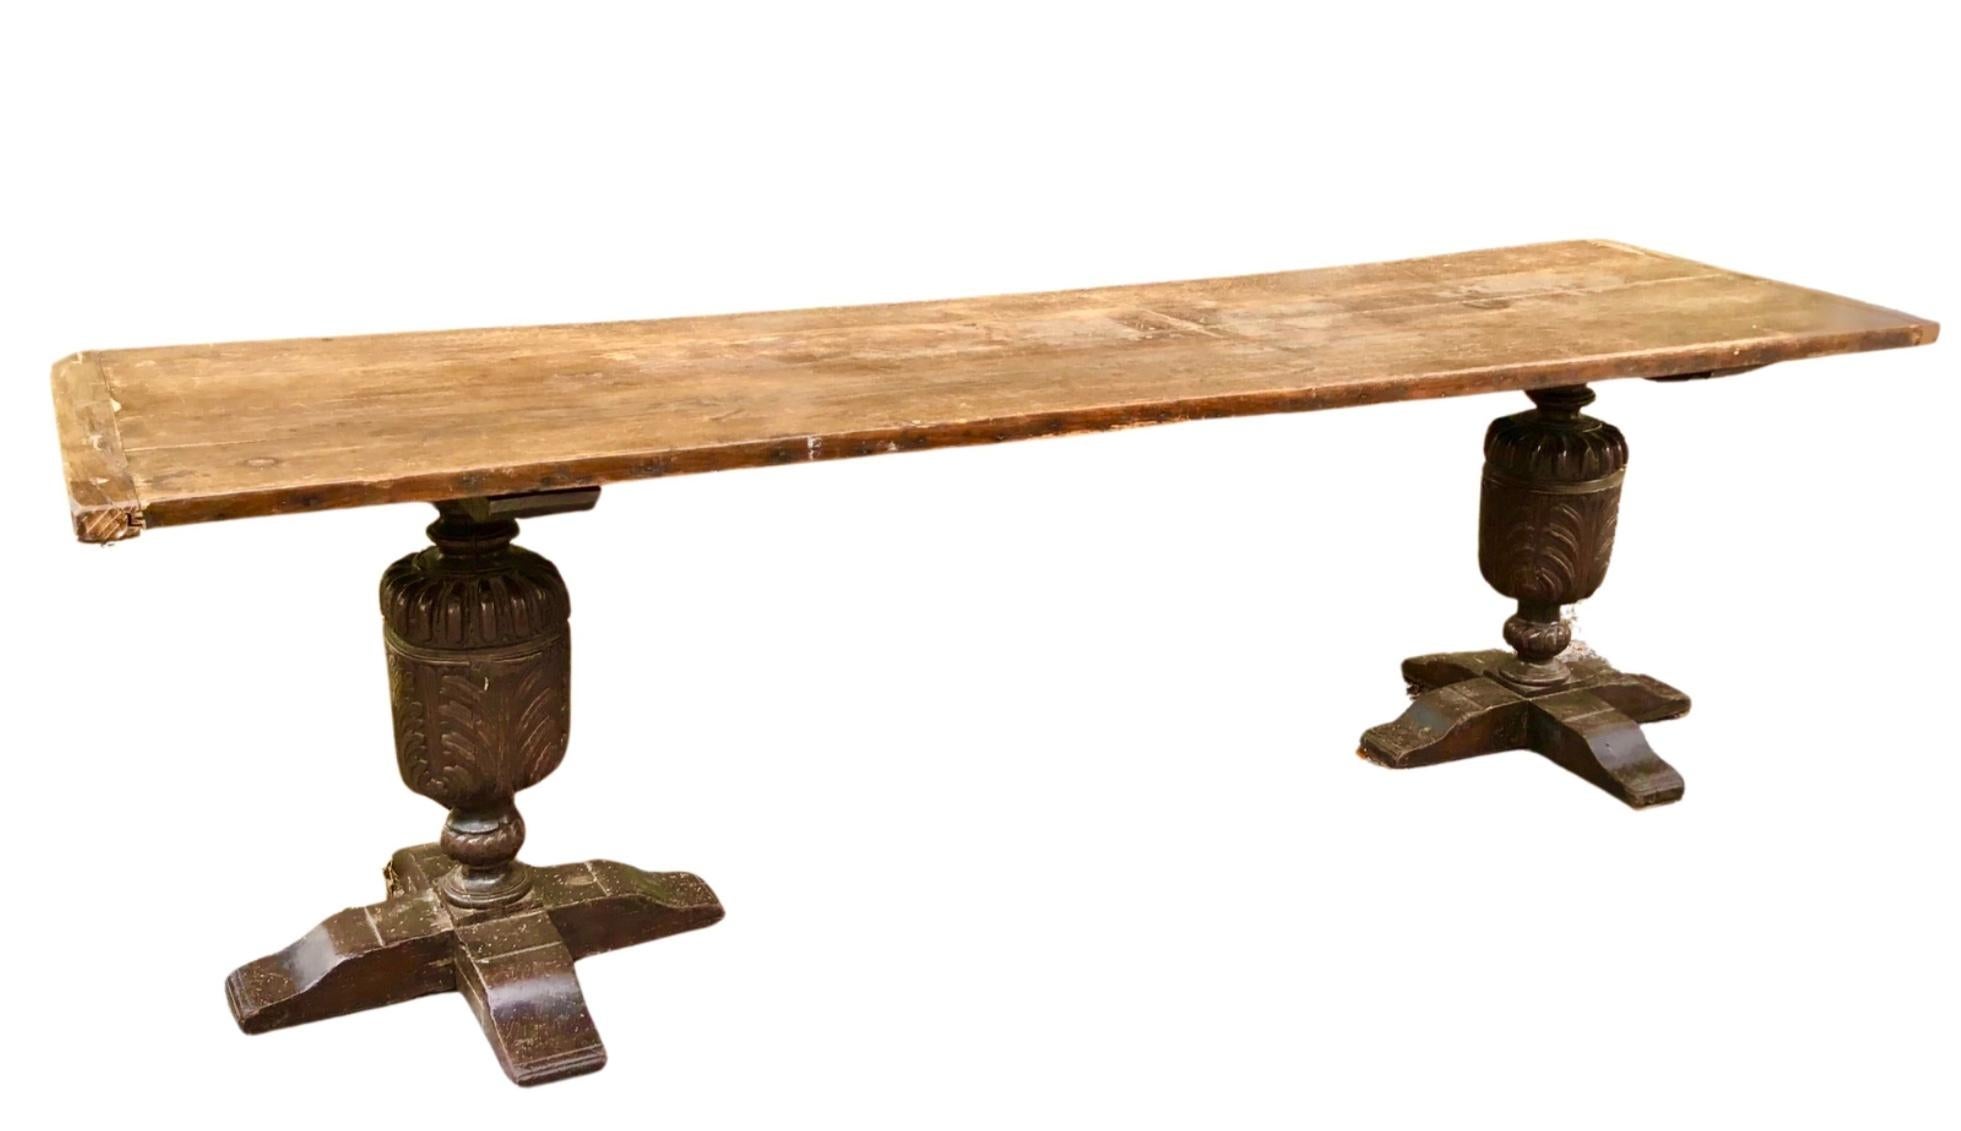 Large and fabulous 18th-century oak refectory table, the two board plank top supported on very large turned and carved bulbous supports. Wonderful old patina. Very stable. The top has a slight warp which just adds to the character and charm of this